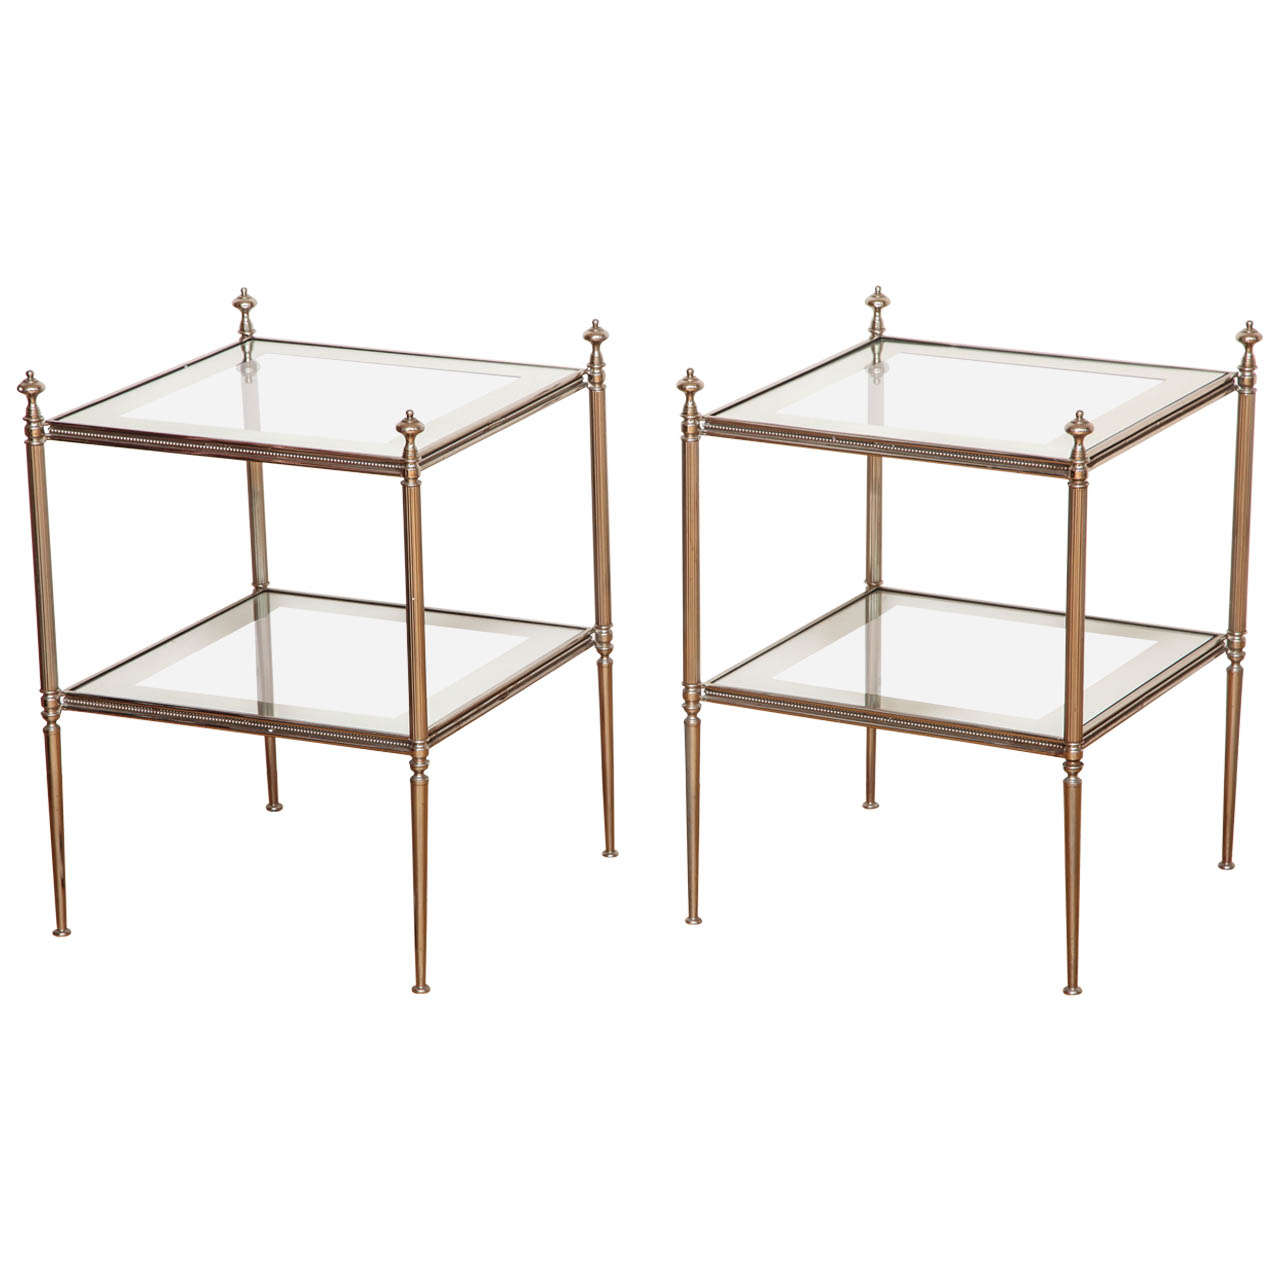 A Pair of Silver Gilt Two Tier Etagere Tables. France, c. 1950